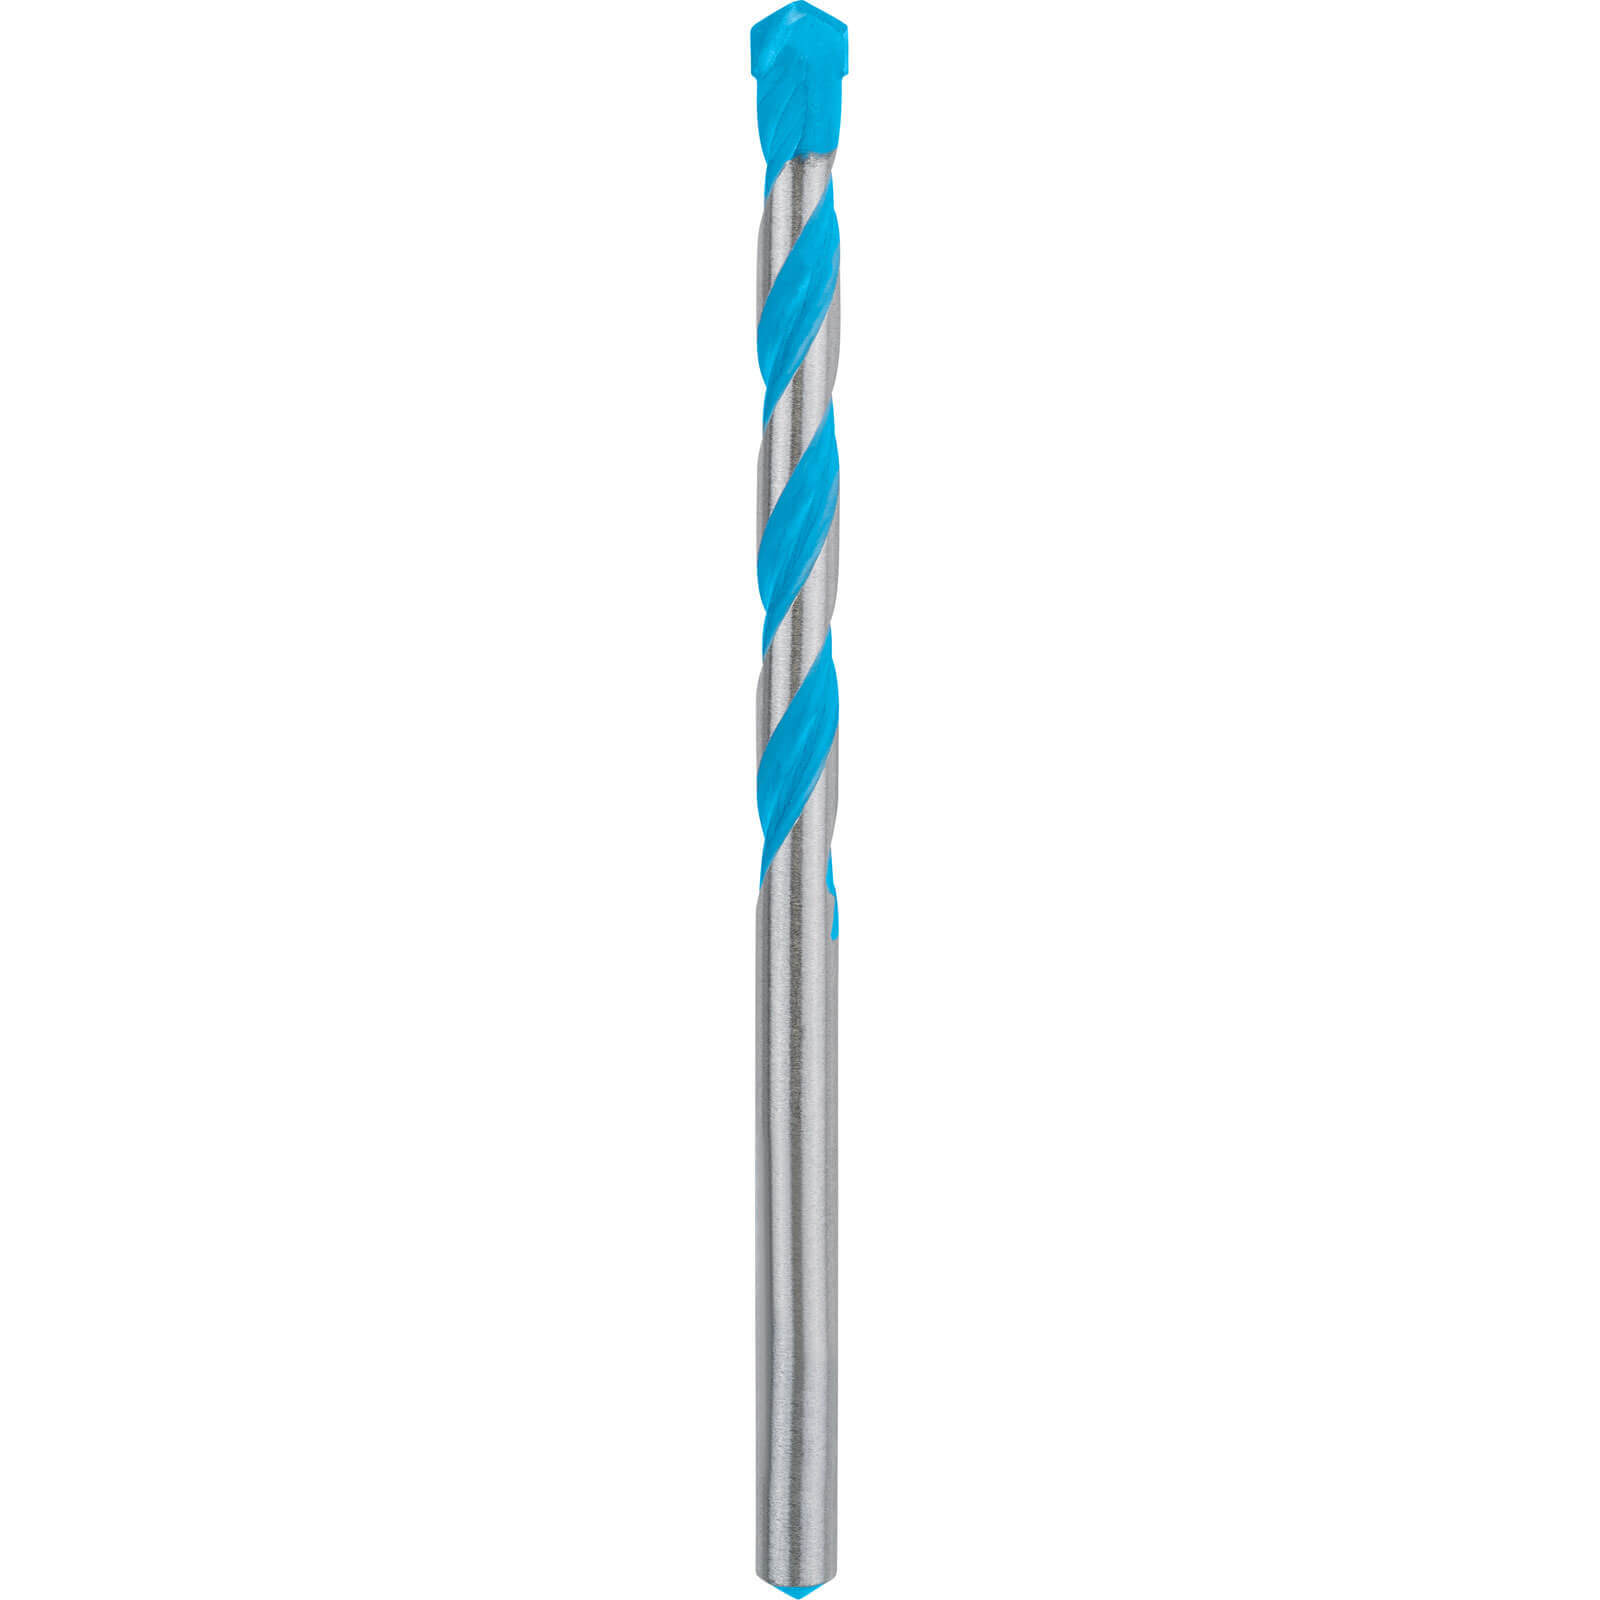 Photo of Bosch Expert Cyl-9 Multi Construction Drill Bit 5.5mm 85mm Pack Of 10